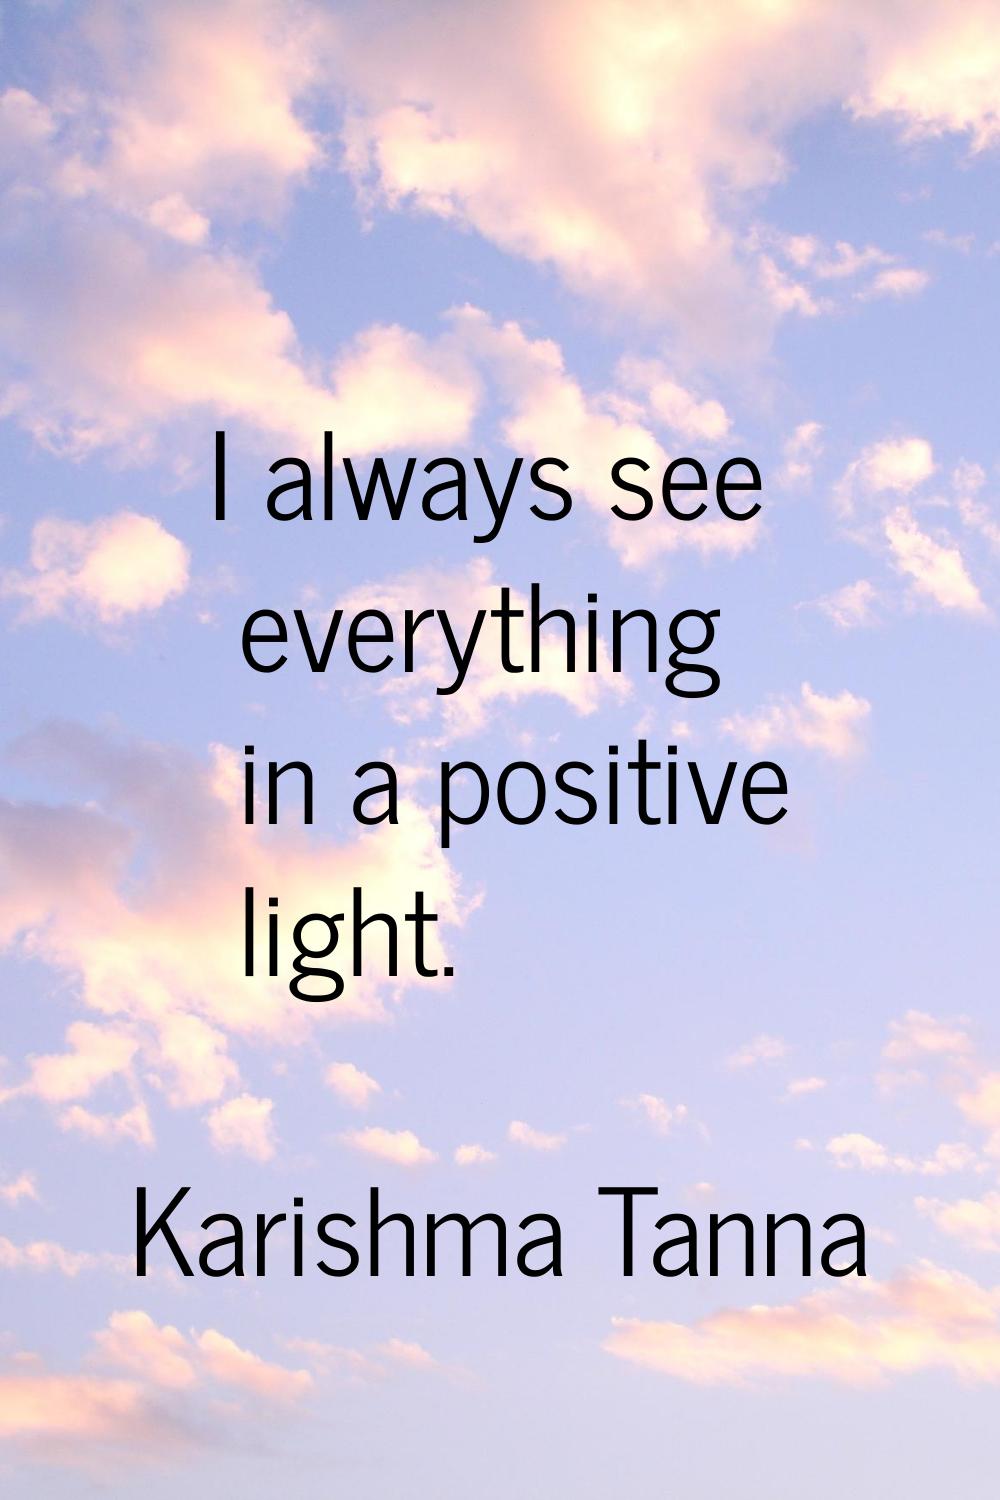 I always see everything in a positive light.